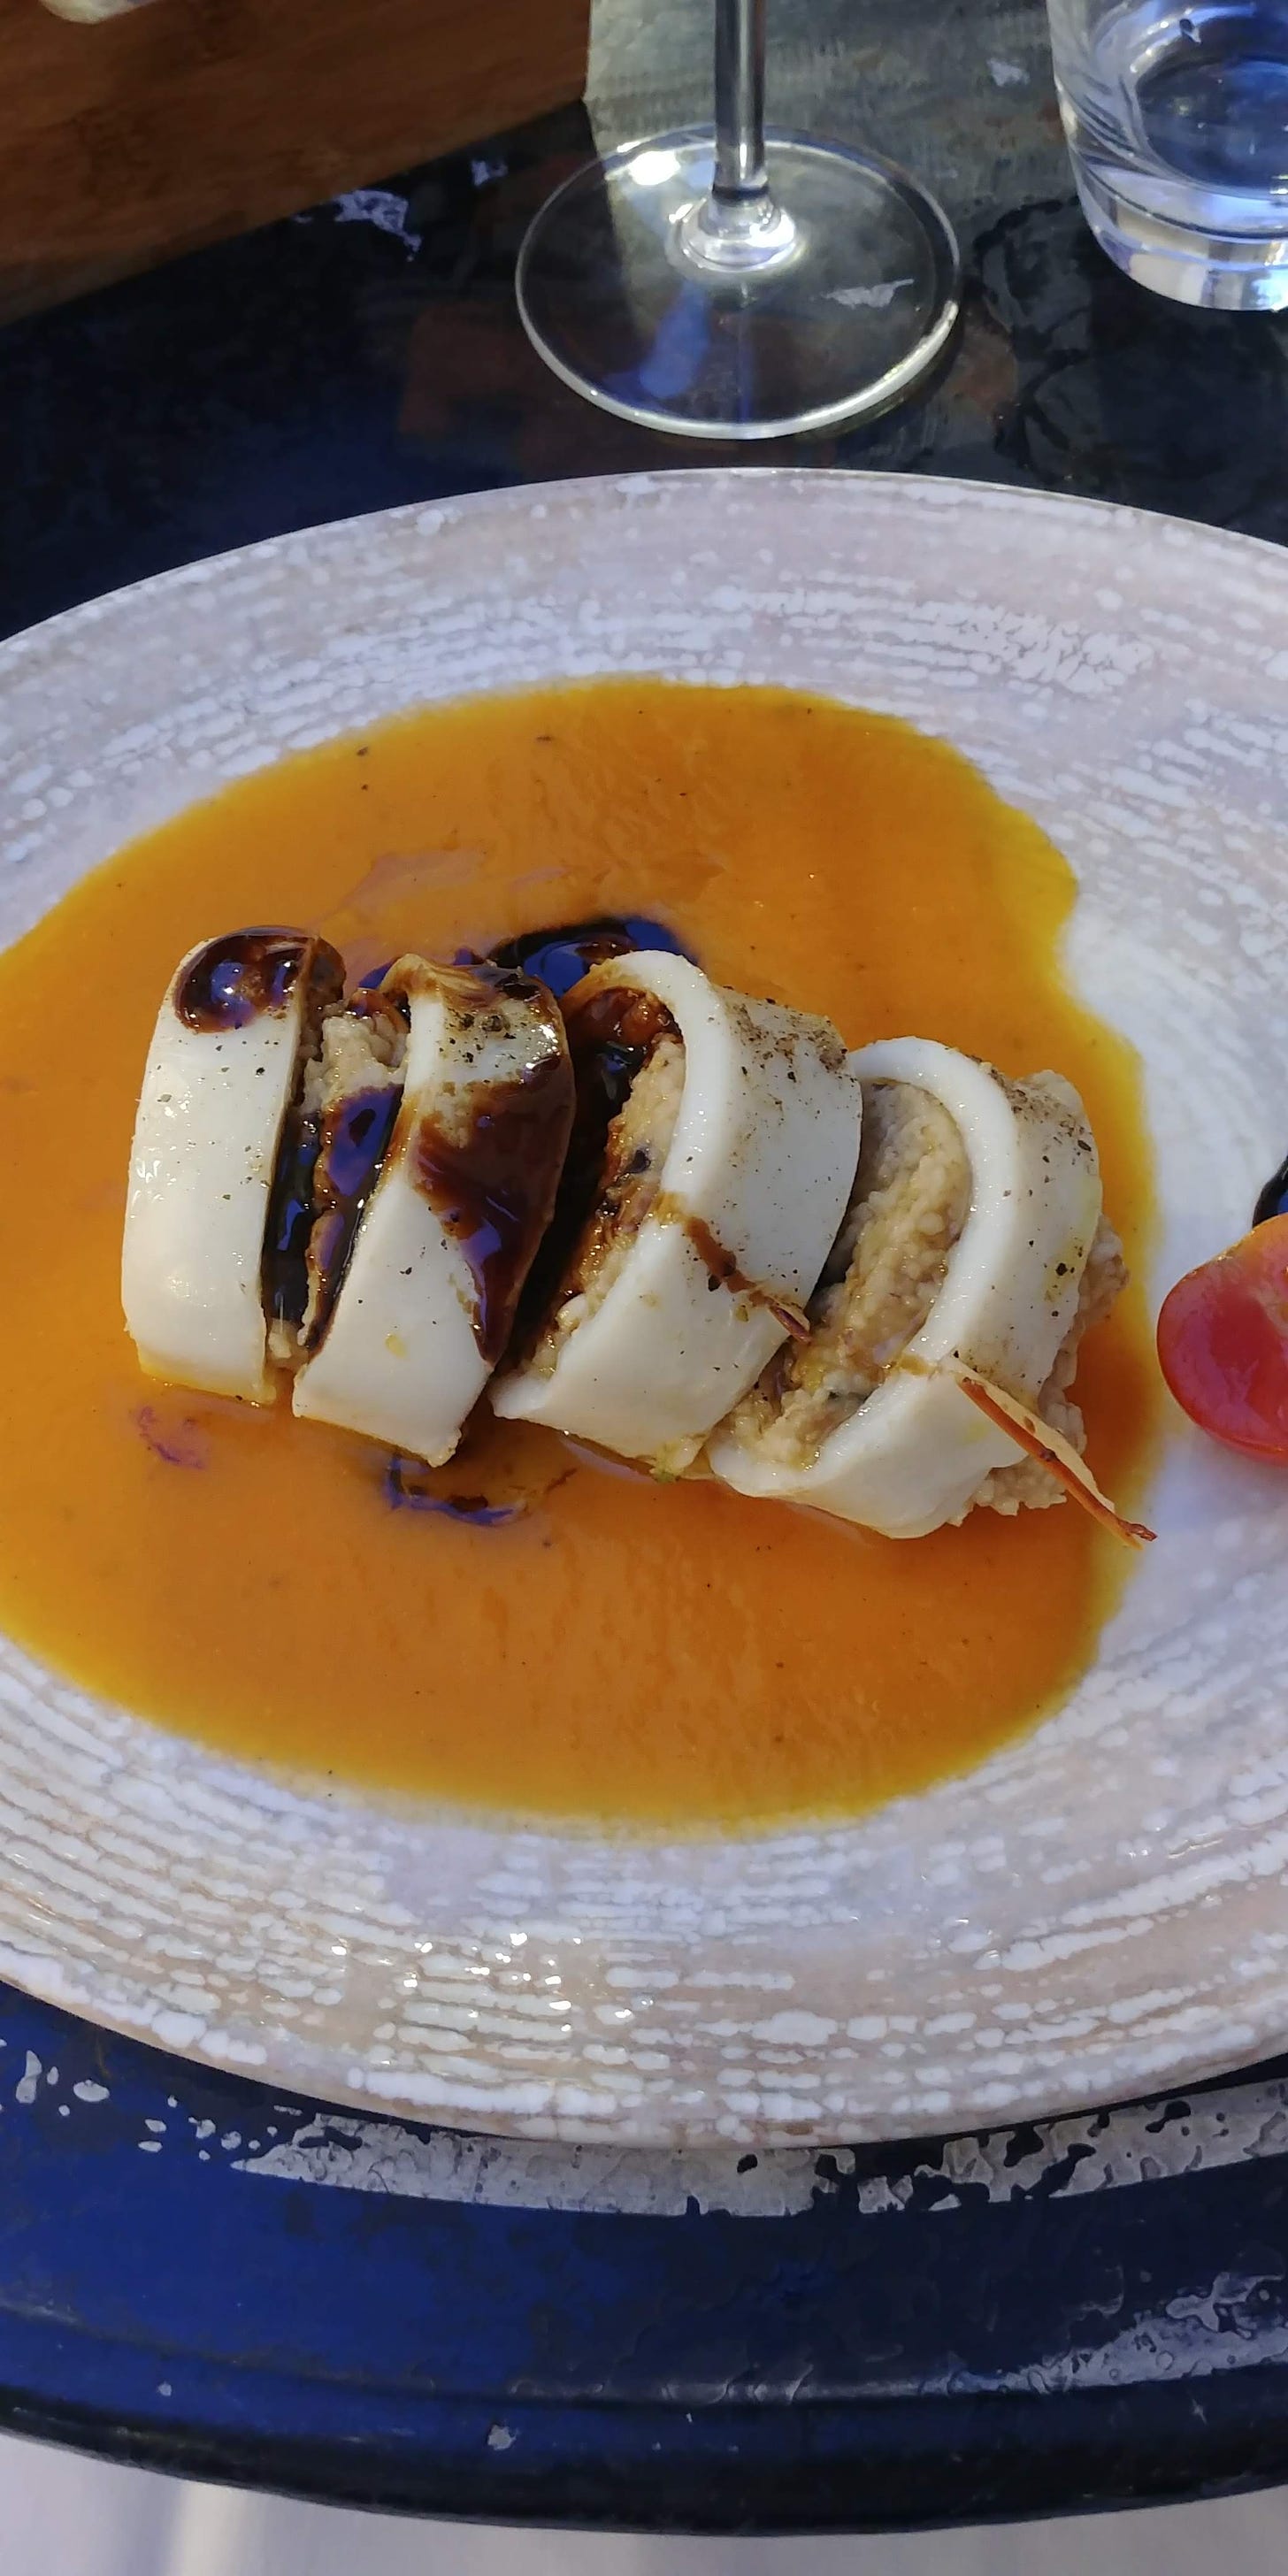 a photo of stuffed squid with couscous. Grainy couscous fills white rounds of squid flesh, cut into slices, on an orange sauce. The dish is served on a round white plate. The base of a wine glass is visible at the top of the image 